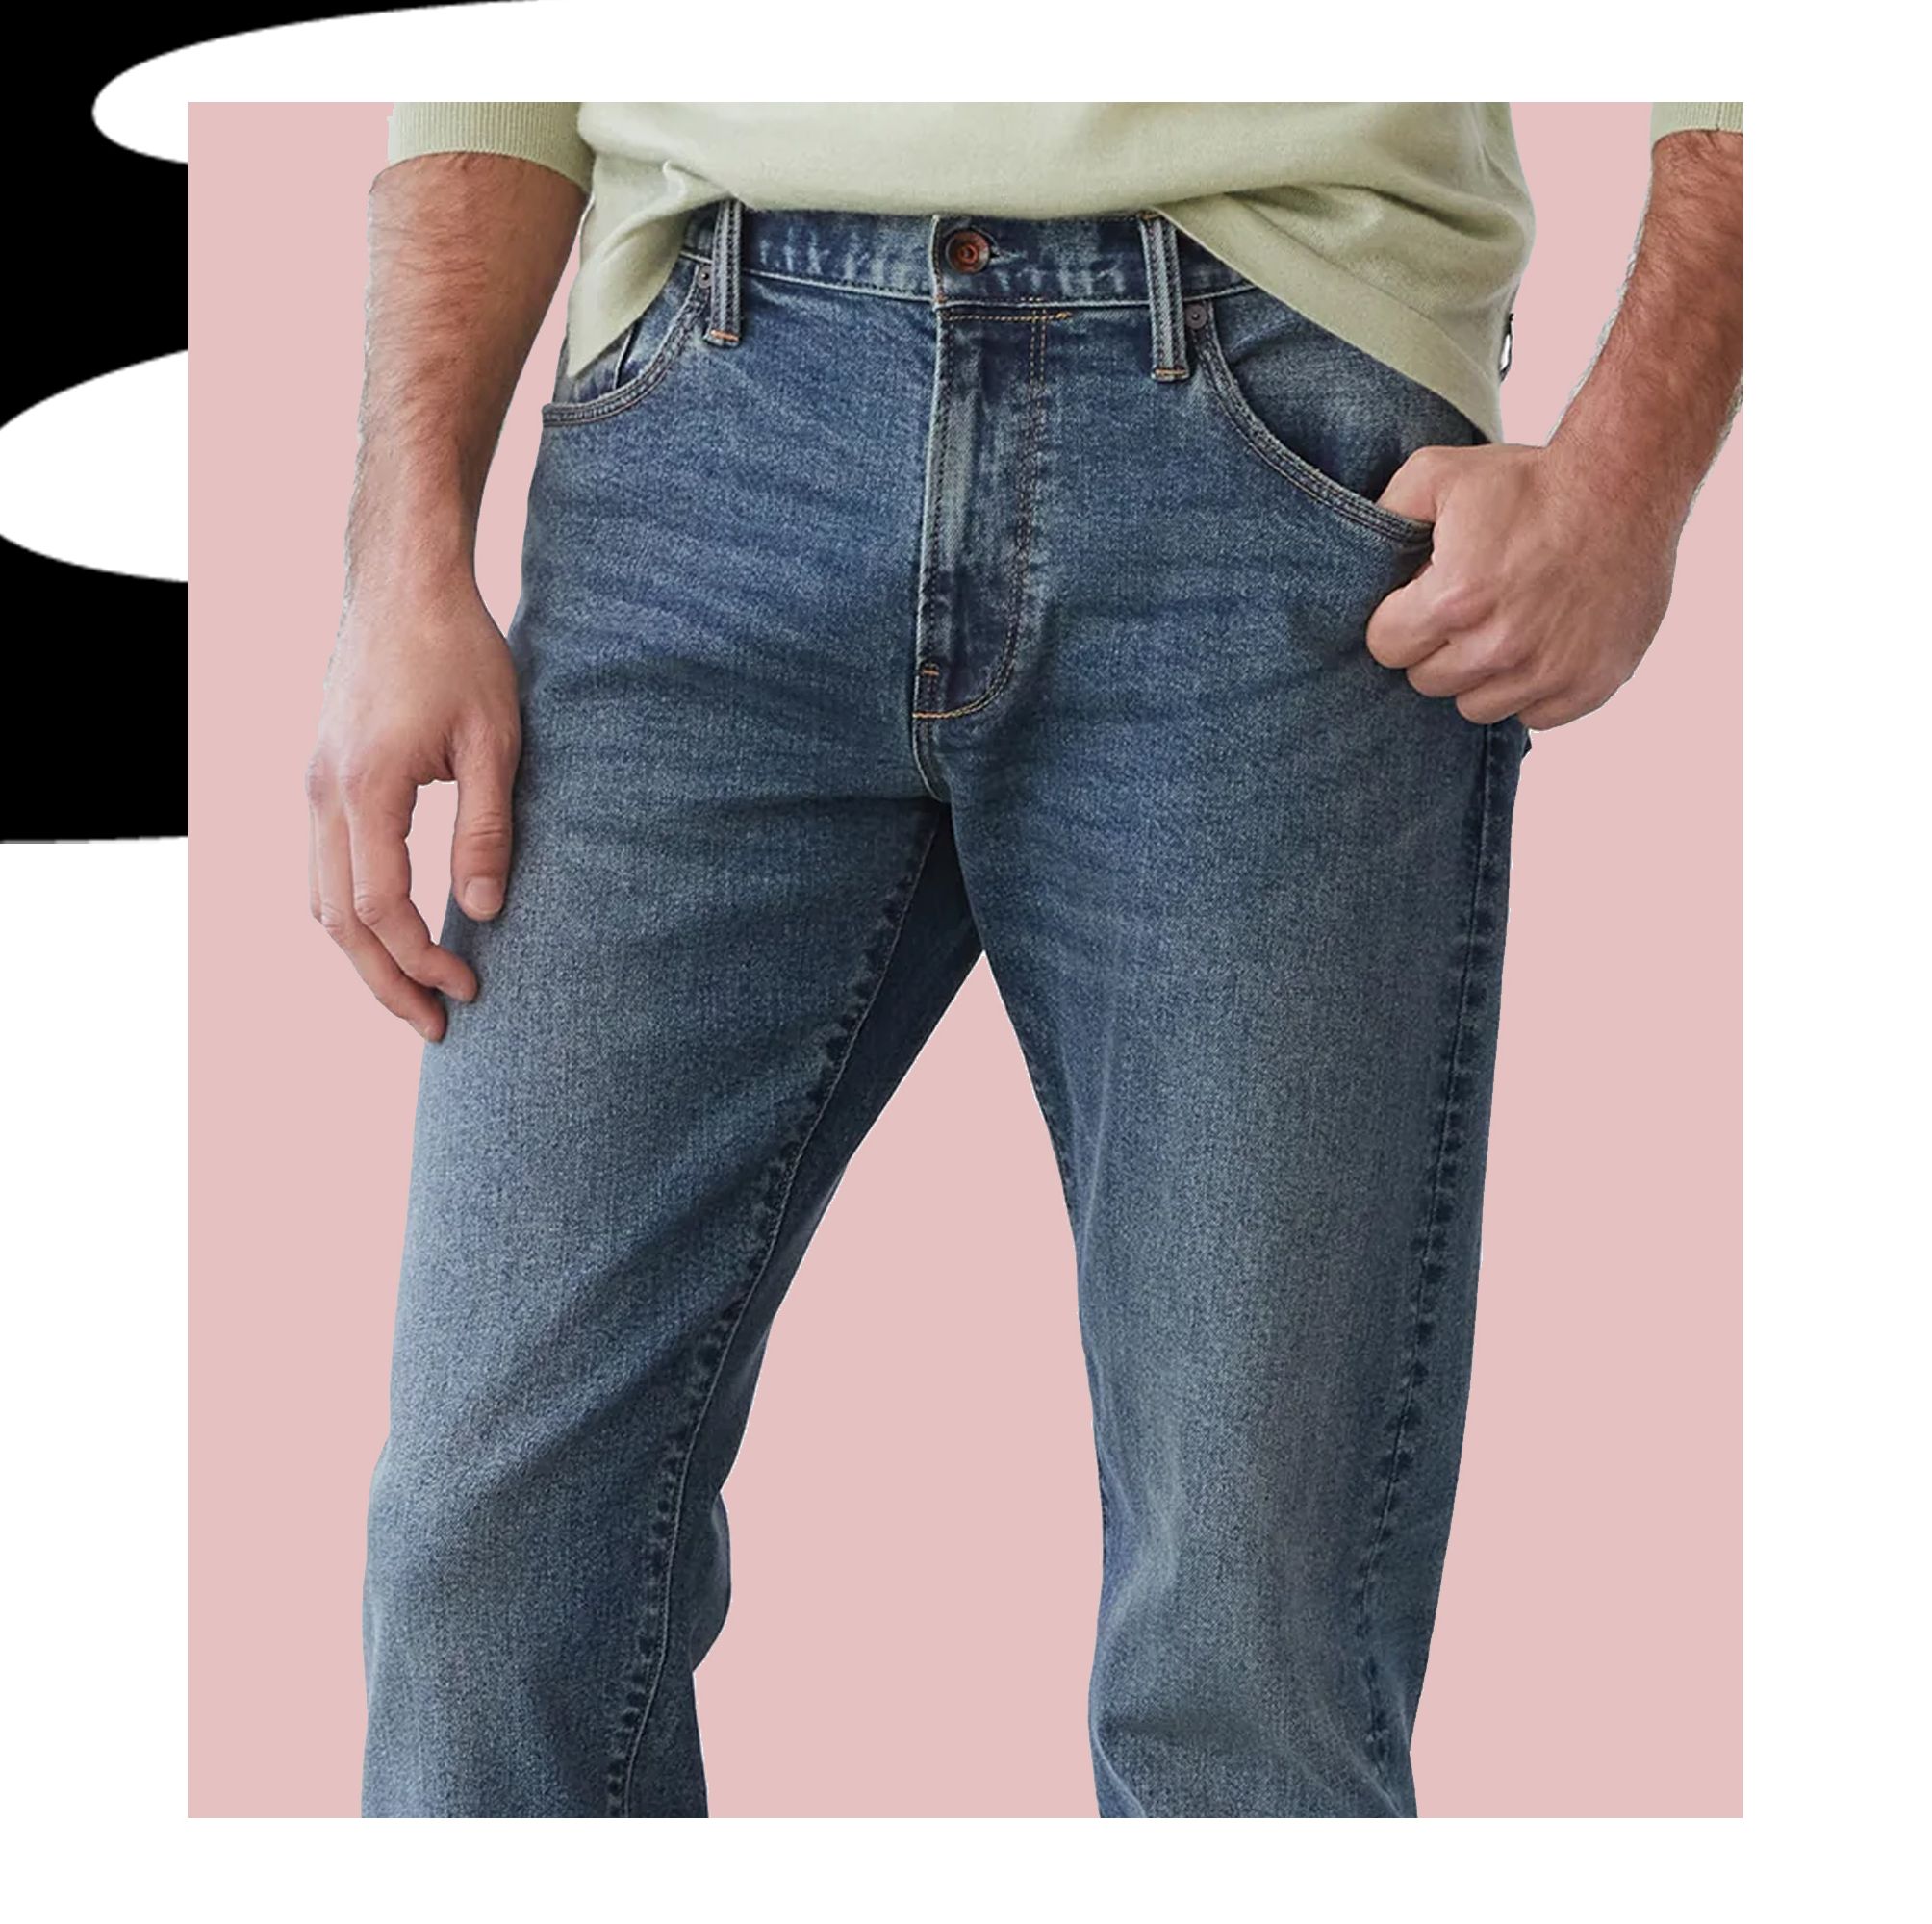 The 27 Best Denim Brands Every Man Needs to Know